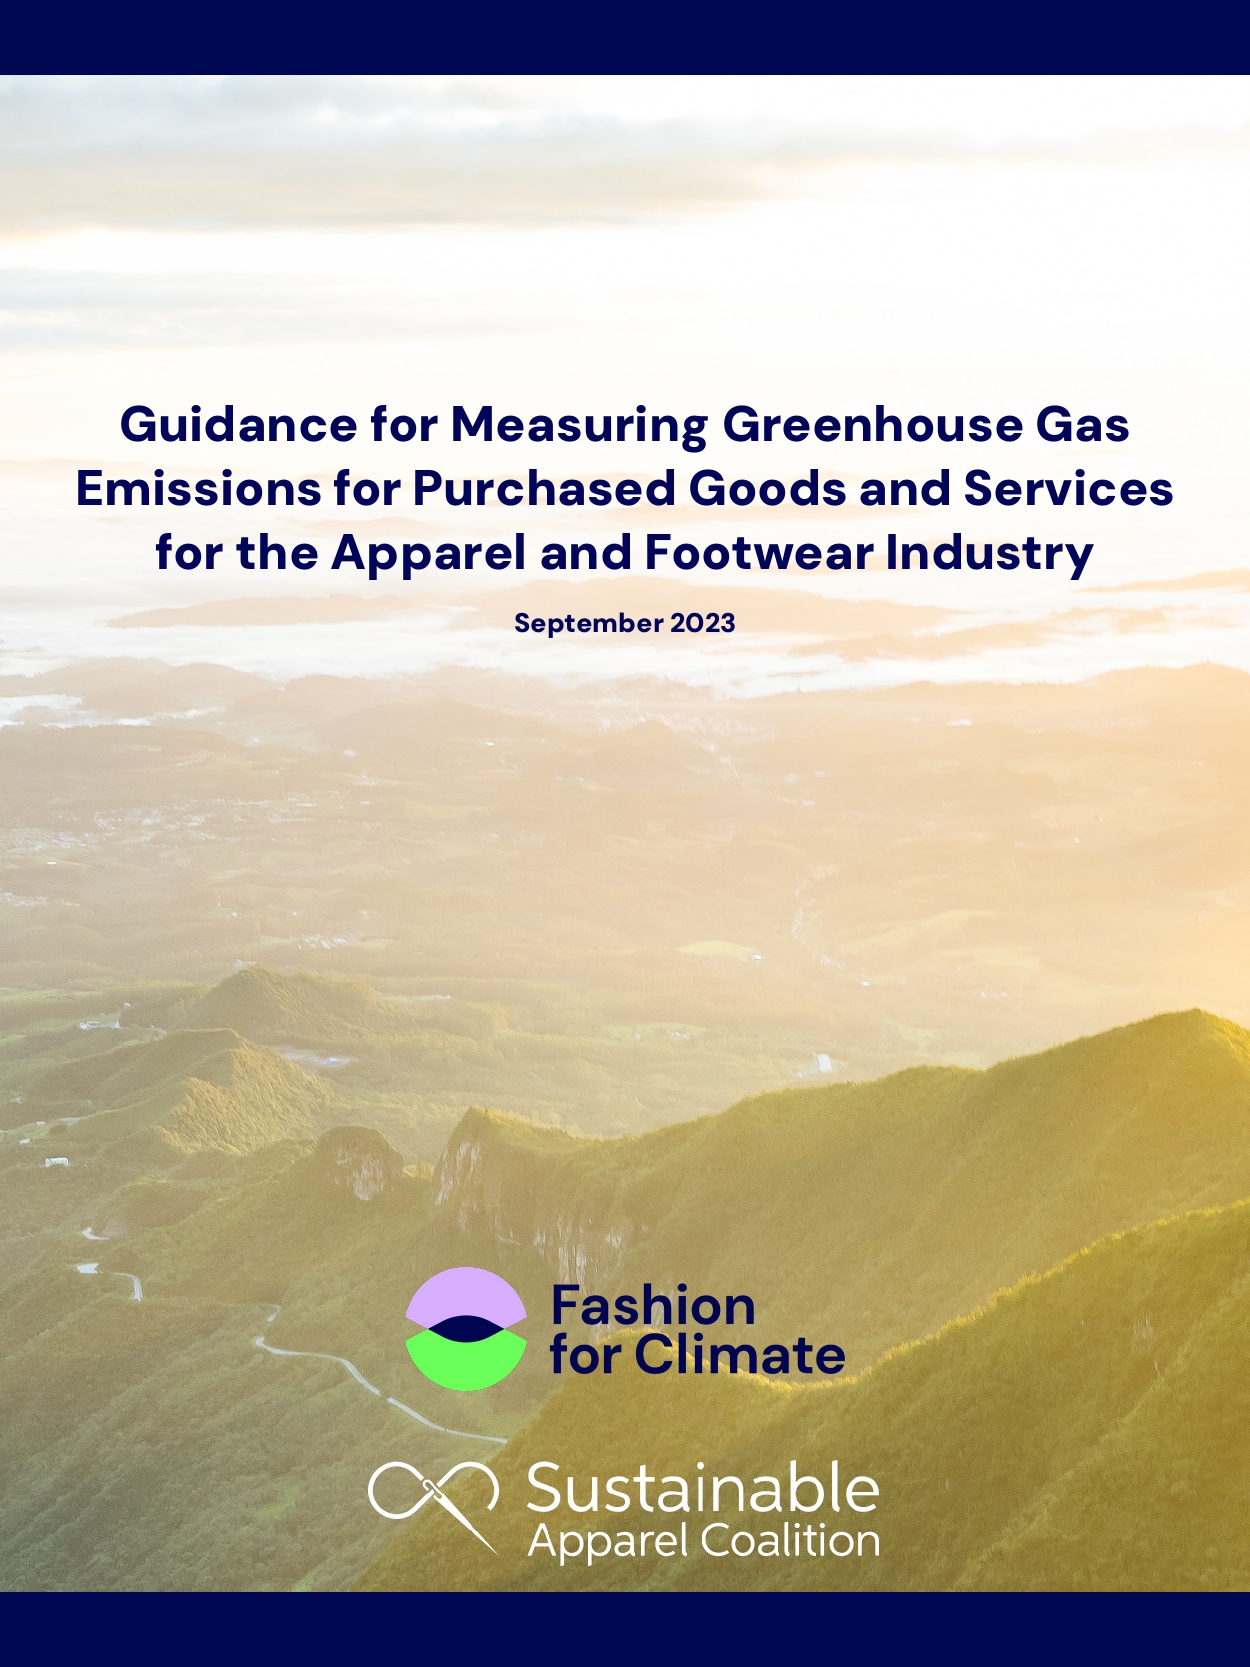 Guidance for Measuring Greenhouse Gas Emissions Scope 3 PG&S